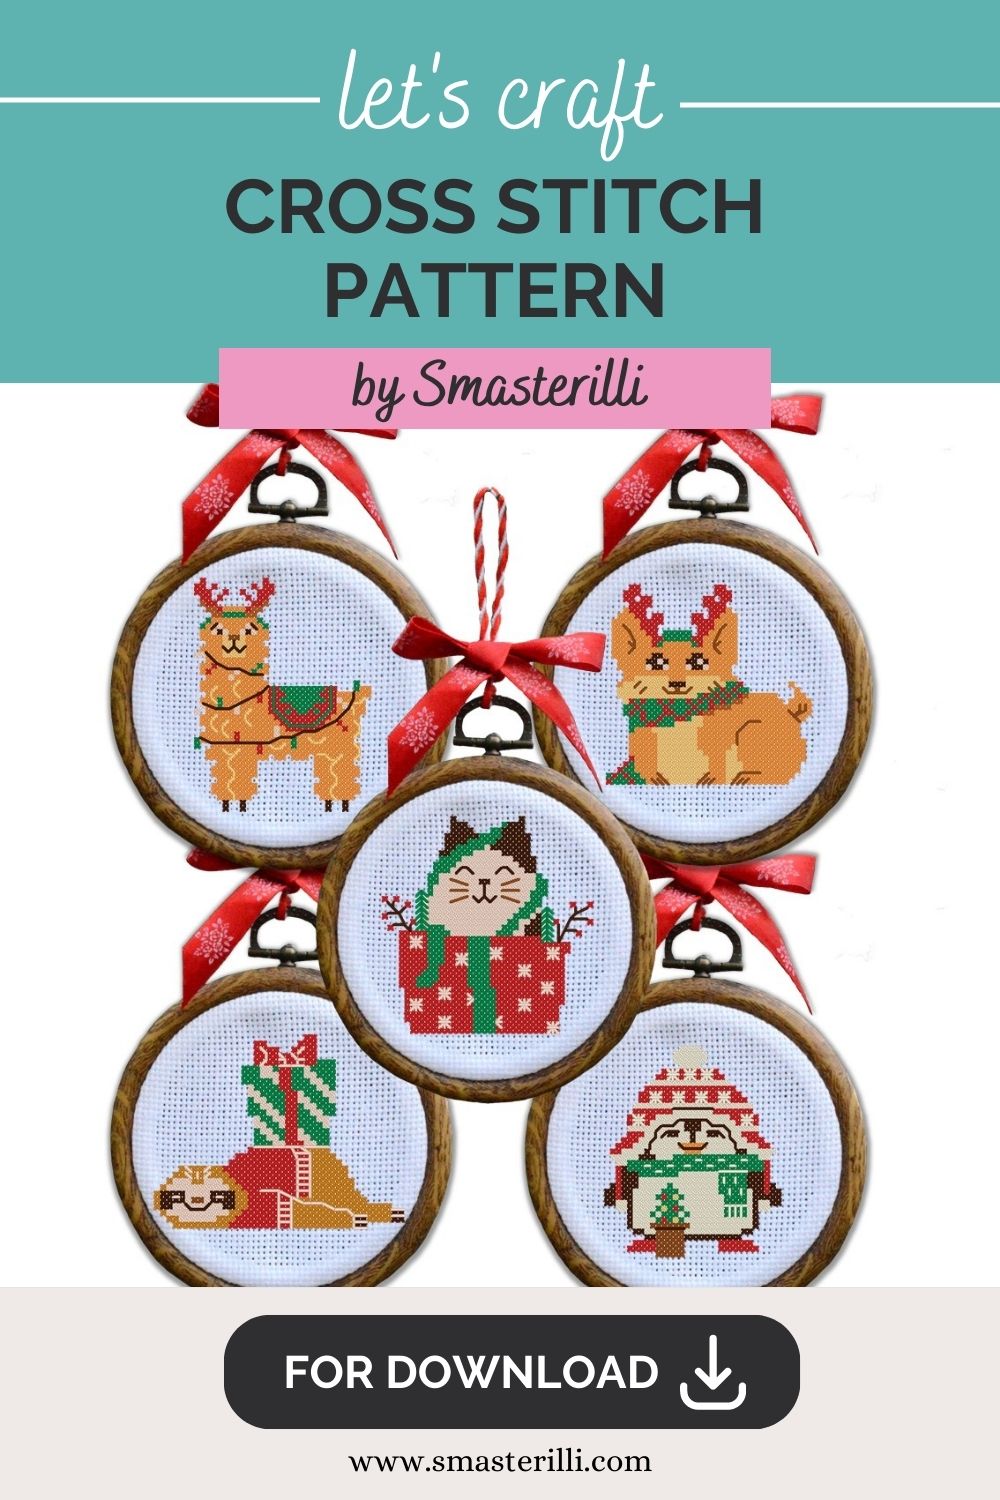 Small Christmas animals cross stitch pattern for gift tags and decorations by Smasterilli. Digital cross stitch pattern for instant download. easy cross stitch for beginners. Christmas handmade crafts #smasterilli #crossstitch #crossstitchpattern #wintercrossstitch #christmascrossstitch #easycrossstitch #tinycrossstitch